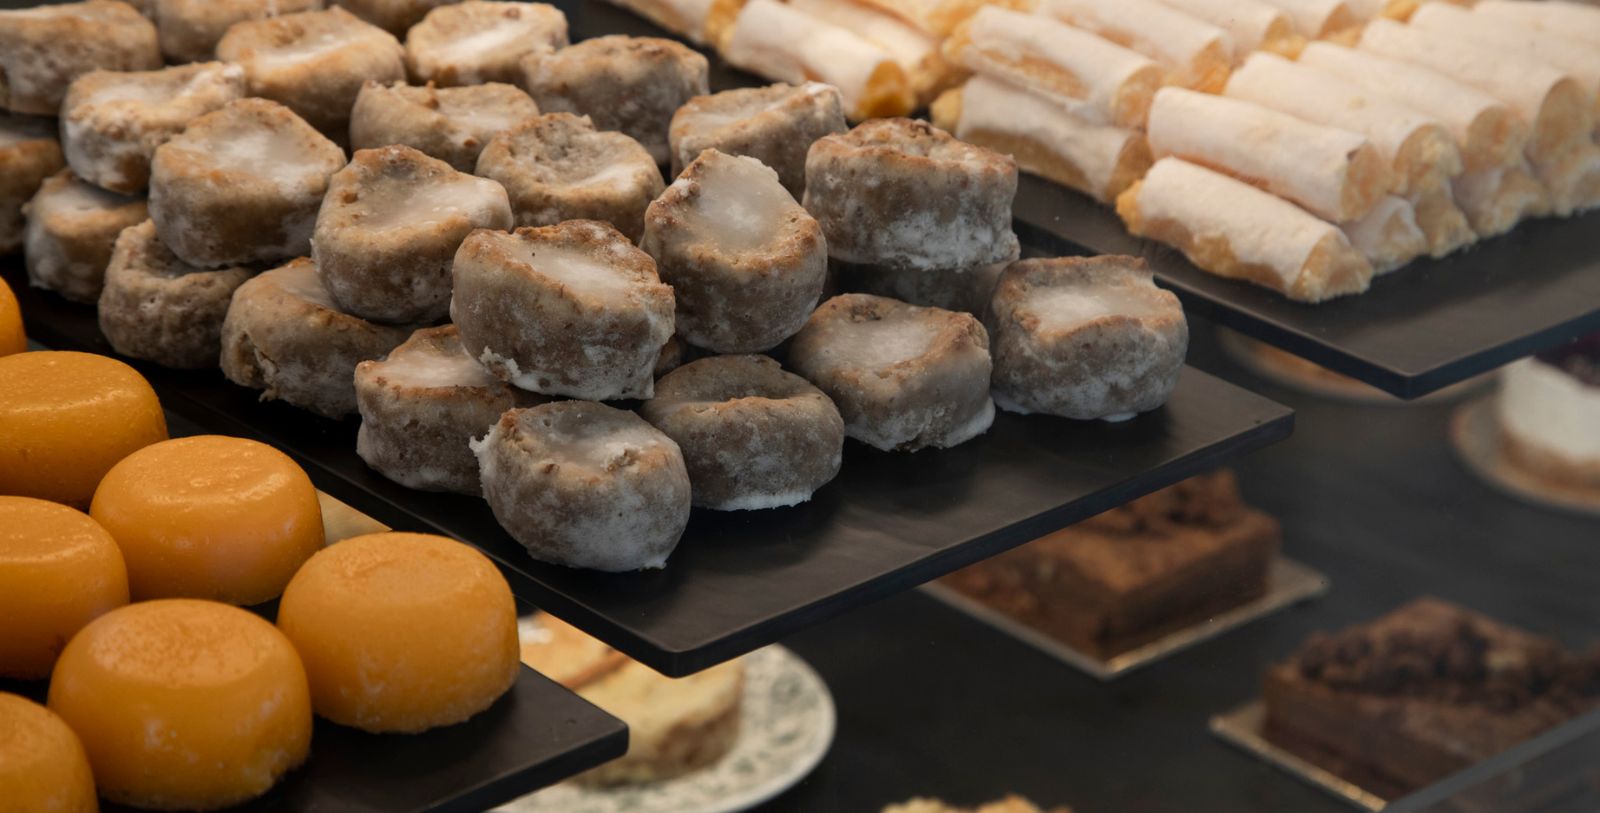 Taste something light and refreshing at Casa das Lérias Cafe & Bar that offers traditional Portuguese sweets.